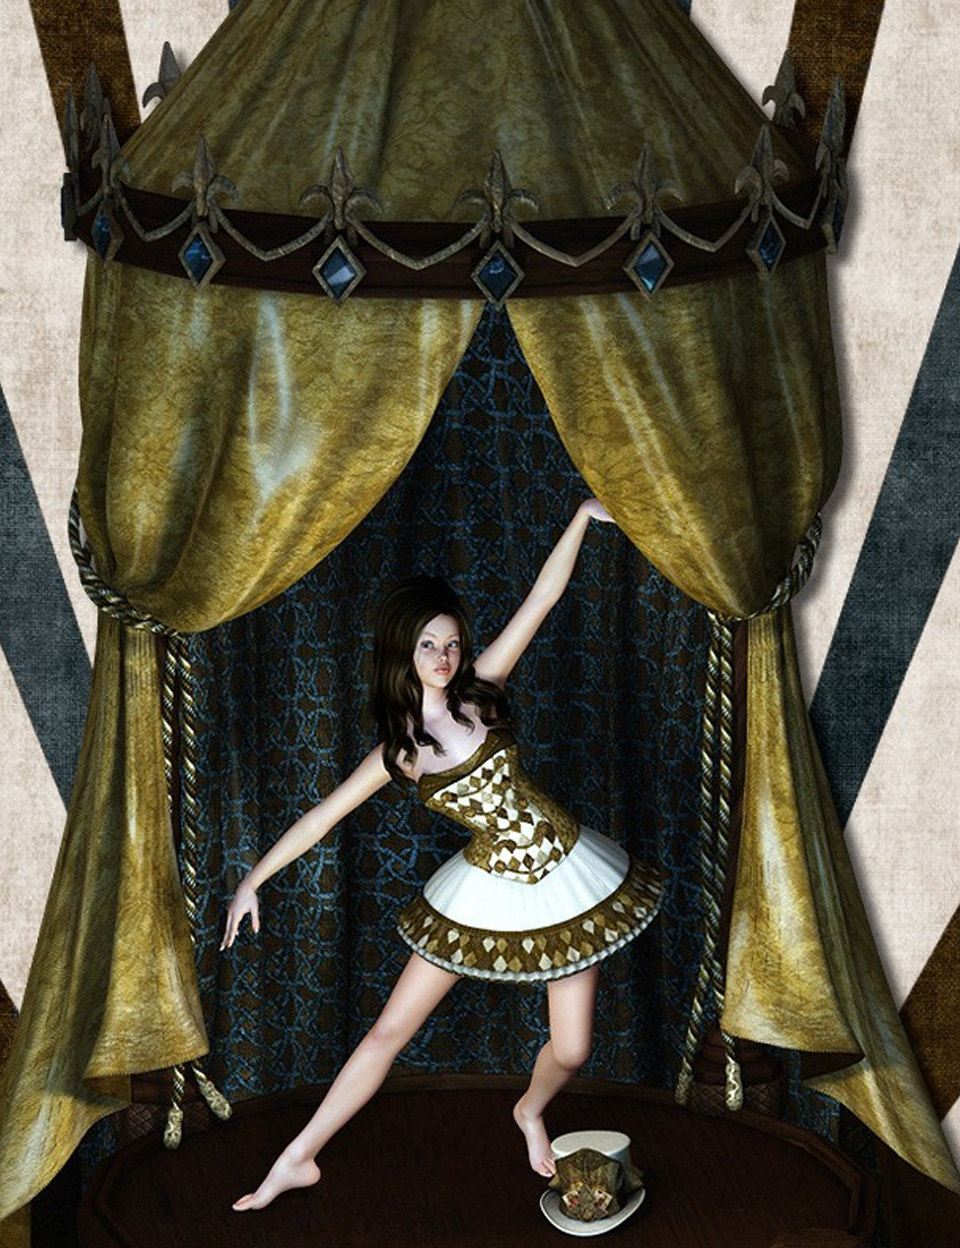 VI Circus - Stage by: Anna BenjaminLady LittlefoxRuntimeDNA, 3D Models by Daz 3D